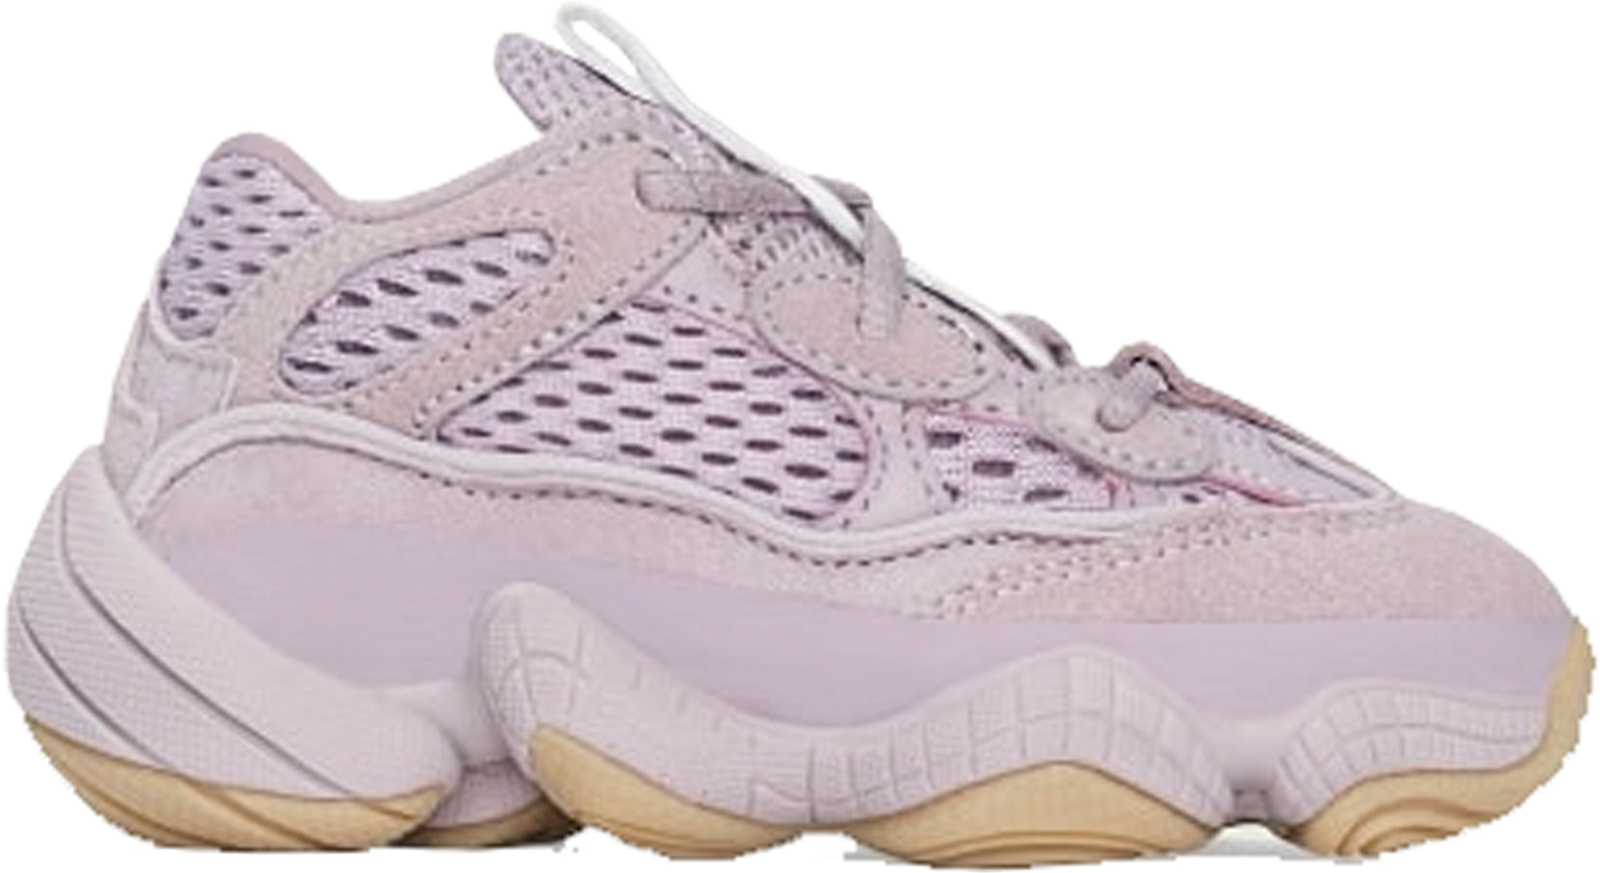 adidas Yeezy 500 Soft Vision (Infant) sneakers